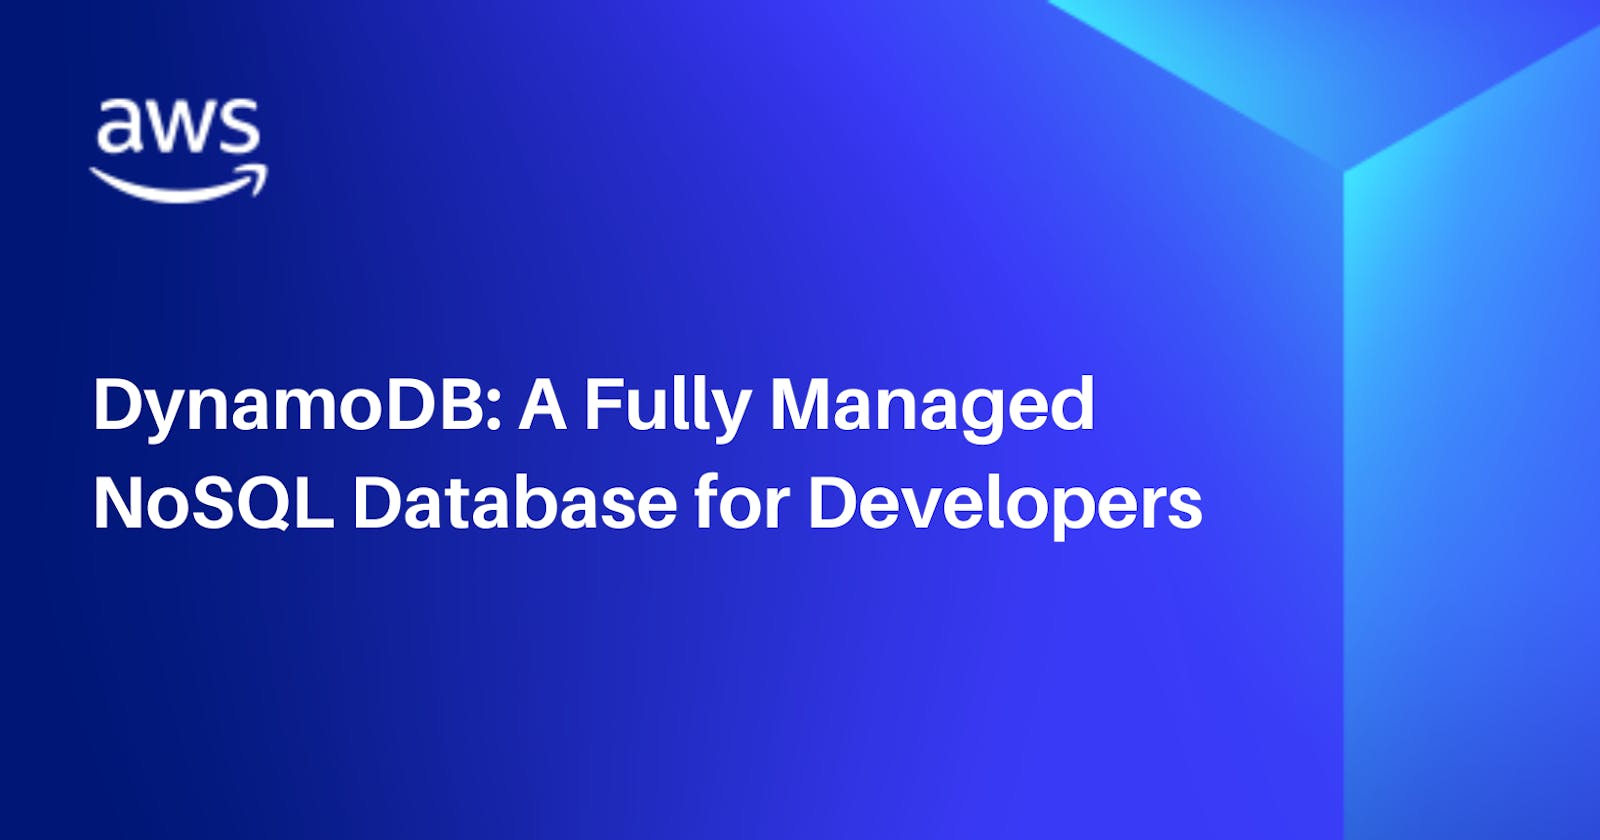 DynamoDB: A Fully Managed NoSQL Database for Developers